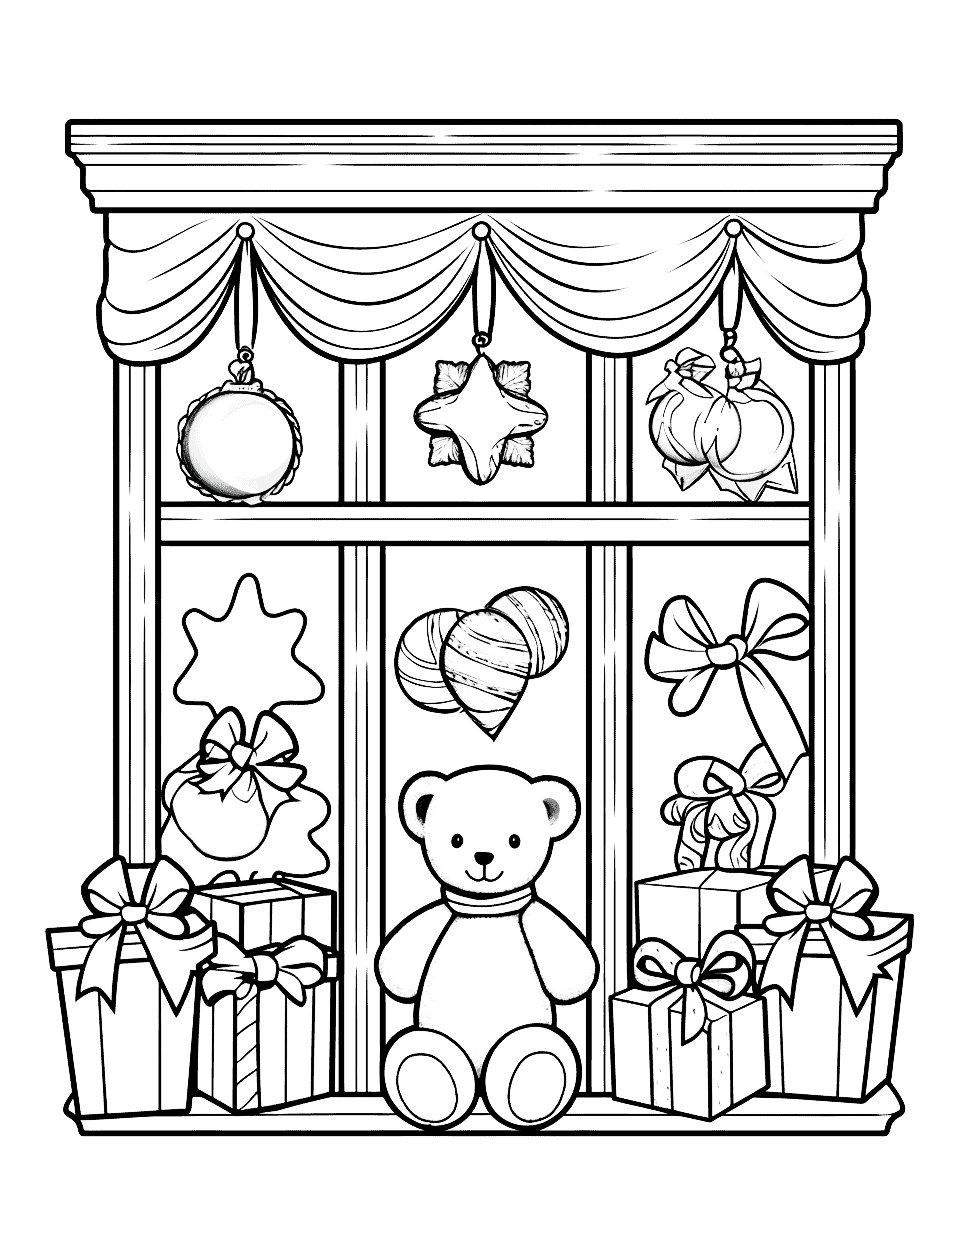 Toy Shop Window Christmas Coloring Page - A toy shop window display full of teddy bears, dolls, and other Christmas gifts.